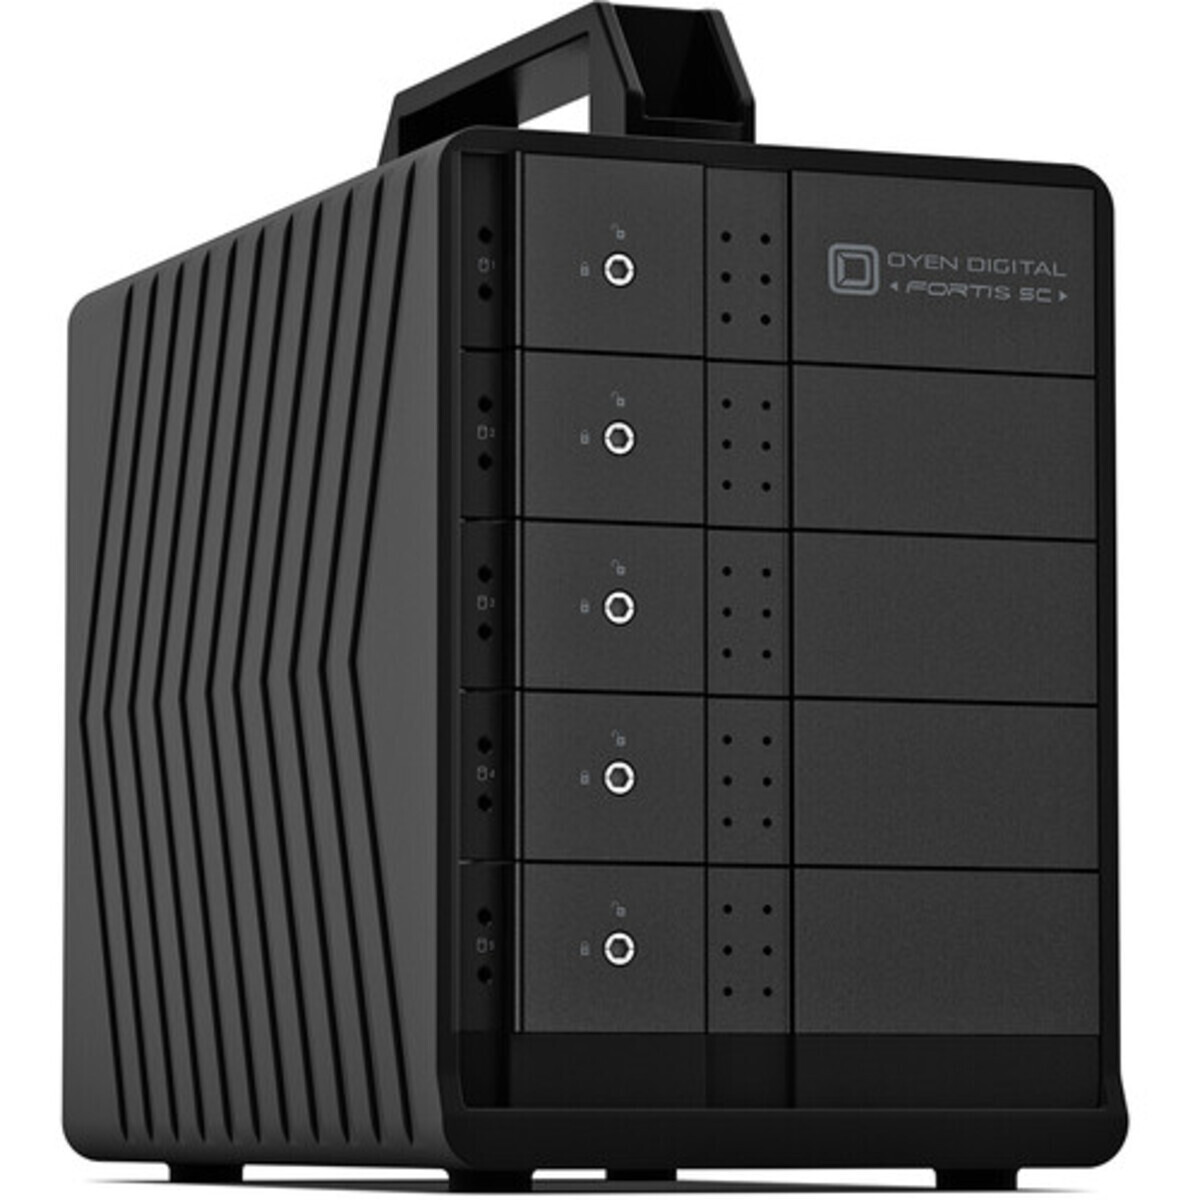 OYEN Fortis 5C 30tb 5-Bay Desktop Multimedia / Power User / Business DAS - Direct Attached Storage Device 5x6tb Seagate EXOS 7E10 ST6000NM019B 3.5 7200rpm SATA 6Gb/s HDD ENTERPRISE Class Drives Installed - Burn-In Tested Fortis 5C